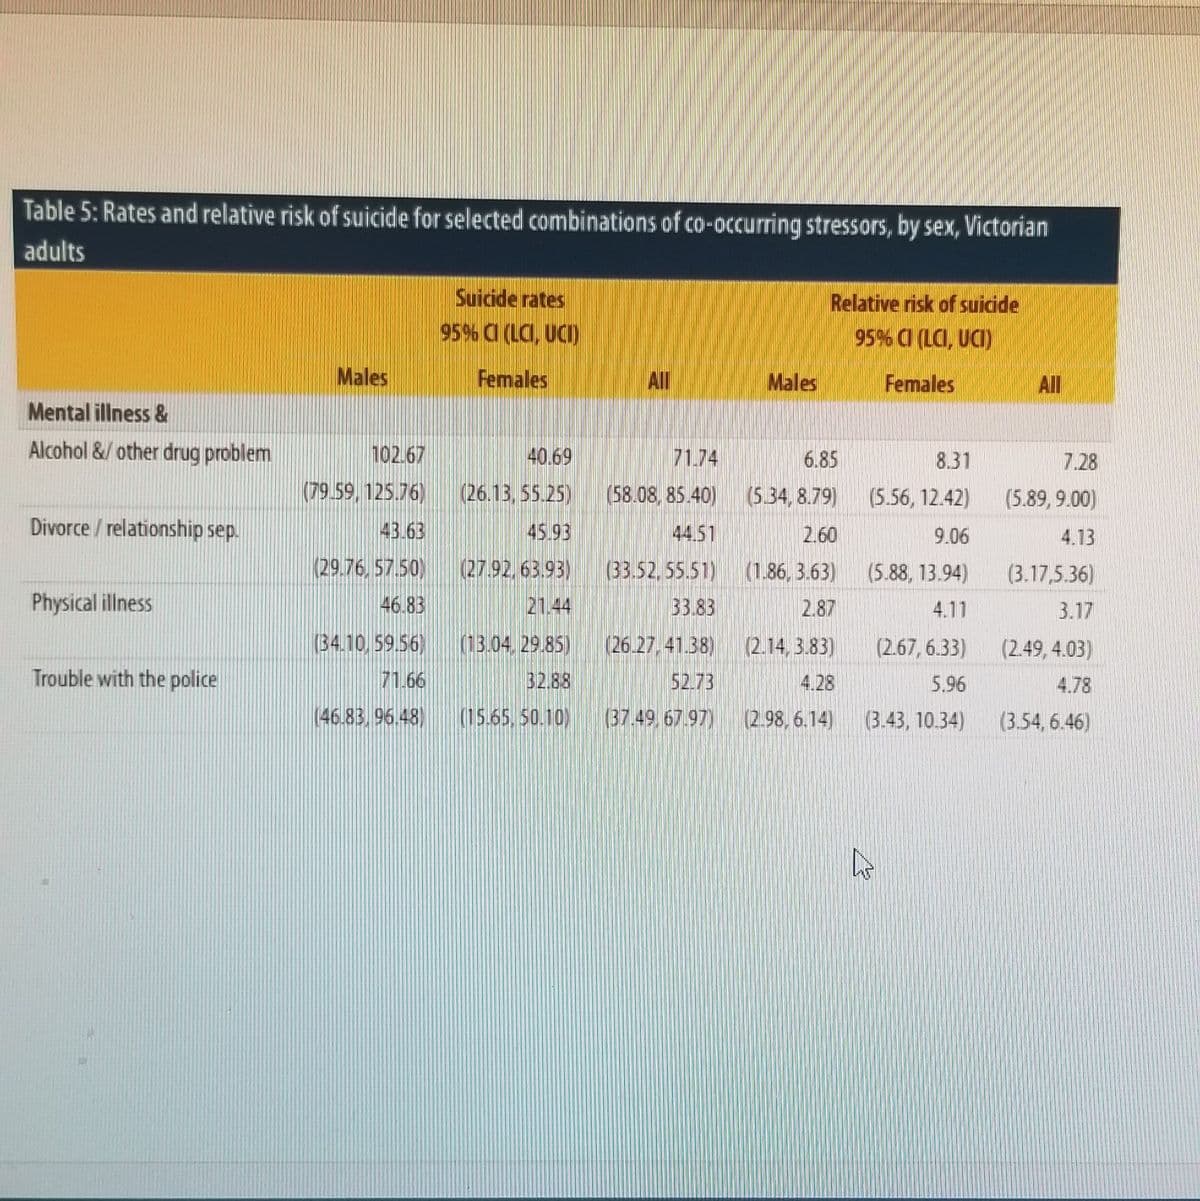 Table 5: Rates and relative risk of suicide for selected combinations of co-occurring stressors, by sex, Victorian
adults
Suicide rates
Relative risk of suicide
95 % a (LC, UCI)
95% C (LCI, UCI)
Males
Females
All
Males
Females
All
Mental illness &
Alcohol &/ other drug problem
102.67
40.69
71.74
6.85
8.31
7.28
(79 59, 125.76)
(26.13, 55.25)
(58.08, 85.40)
(5.34, 8.79)
(5.56, 12.42)
(5.89, 9.00)
Divorce / relationship sep.
43.63
45.93
44.51
2.60
9.06
4.13
(29.76, 57.50)
(27.92, 63.93)
(33.52, 55.51)
(1.86, 3.63)
(5.88, 13.94)
(3.17,5.36)
Physical illness
46.83
21.44
33.83
2.87
4.11
3.17
34.10, 59.56)
(13.04. 29.85)
26.27, 41.38)
(2.14, 3.83)
(2.67,6.33)
(2.49,4.03)
Trouble with the police
71.66
32.88
52.73
4.28
5.96
4.78
(46.83, 96.48)
(15.65, 50.10)
37.49,67.97)
(2.98, 6.14)
(3.43, 10.34)
(3.54,6.46)
